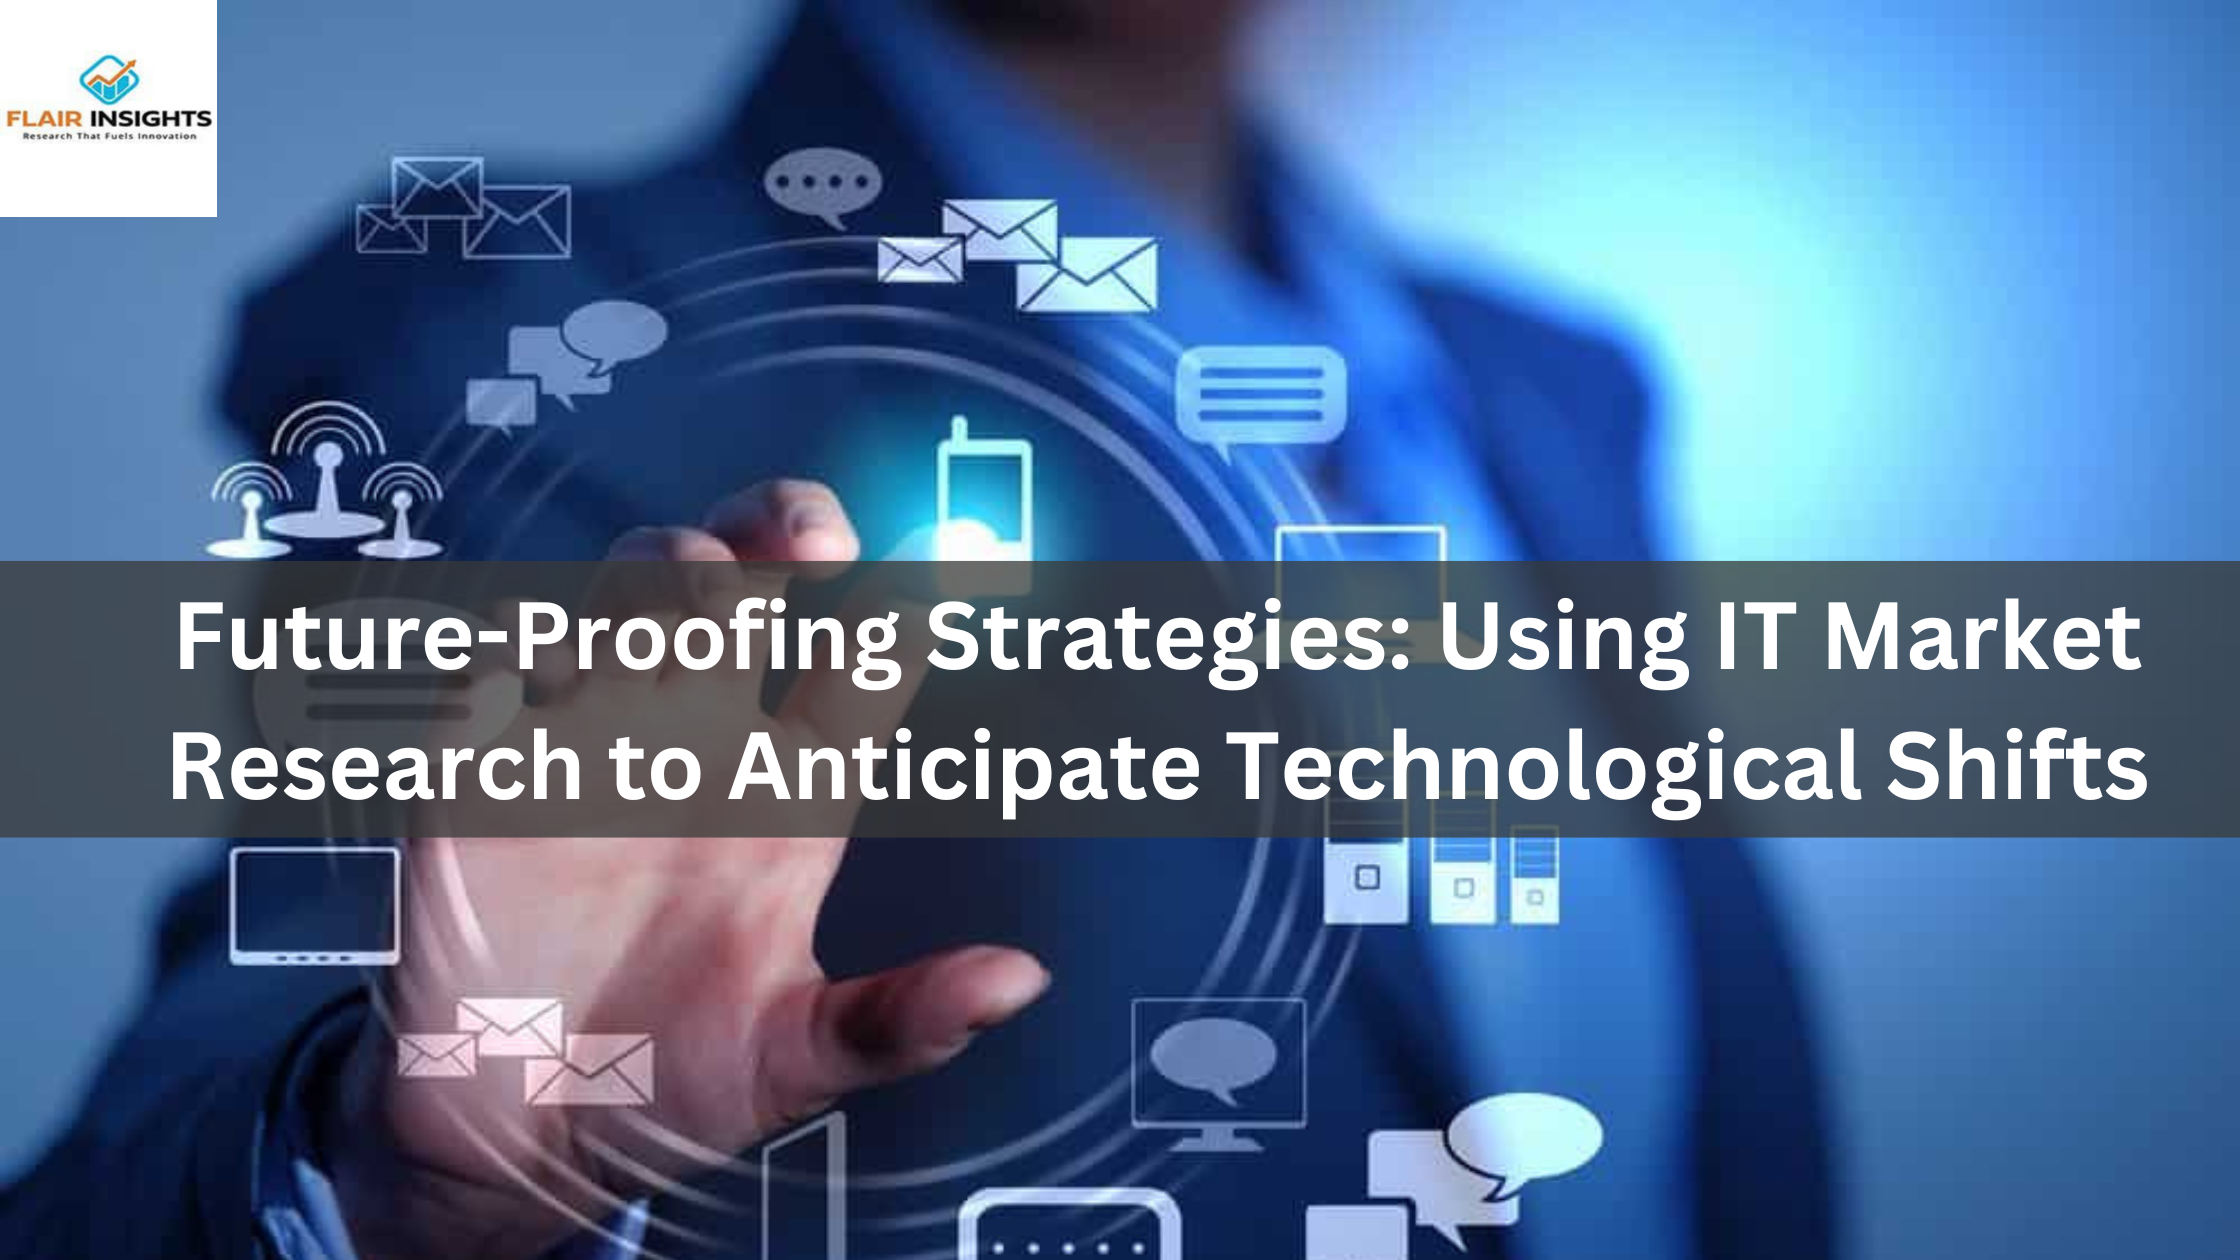 Future-Proofing Strategies: Using IT Market Research to Anticipate Technological Shifts